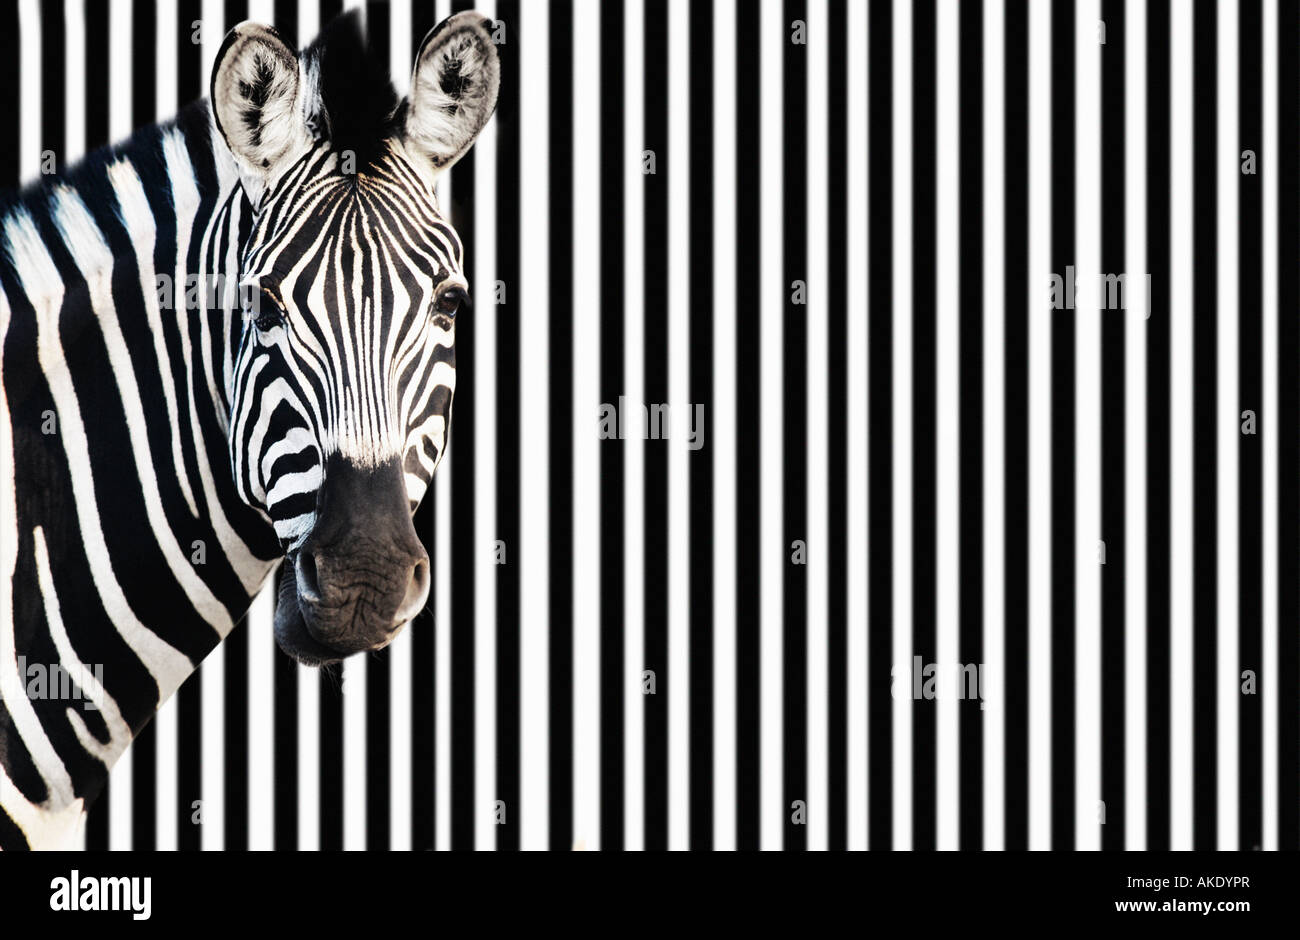 Zebra on striped background, looking at camera Stock Photo